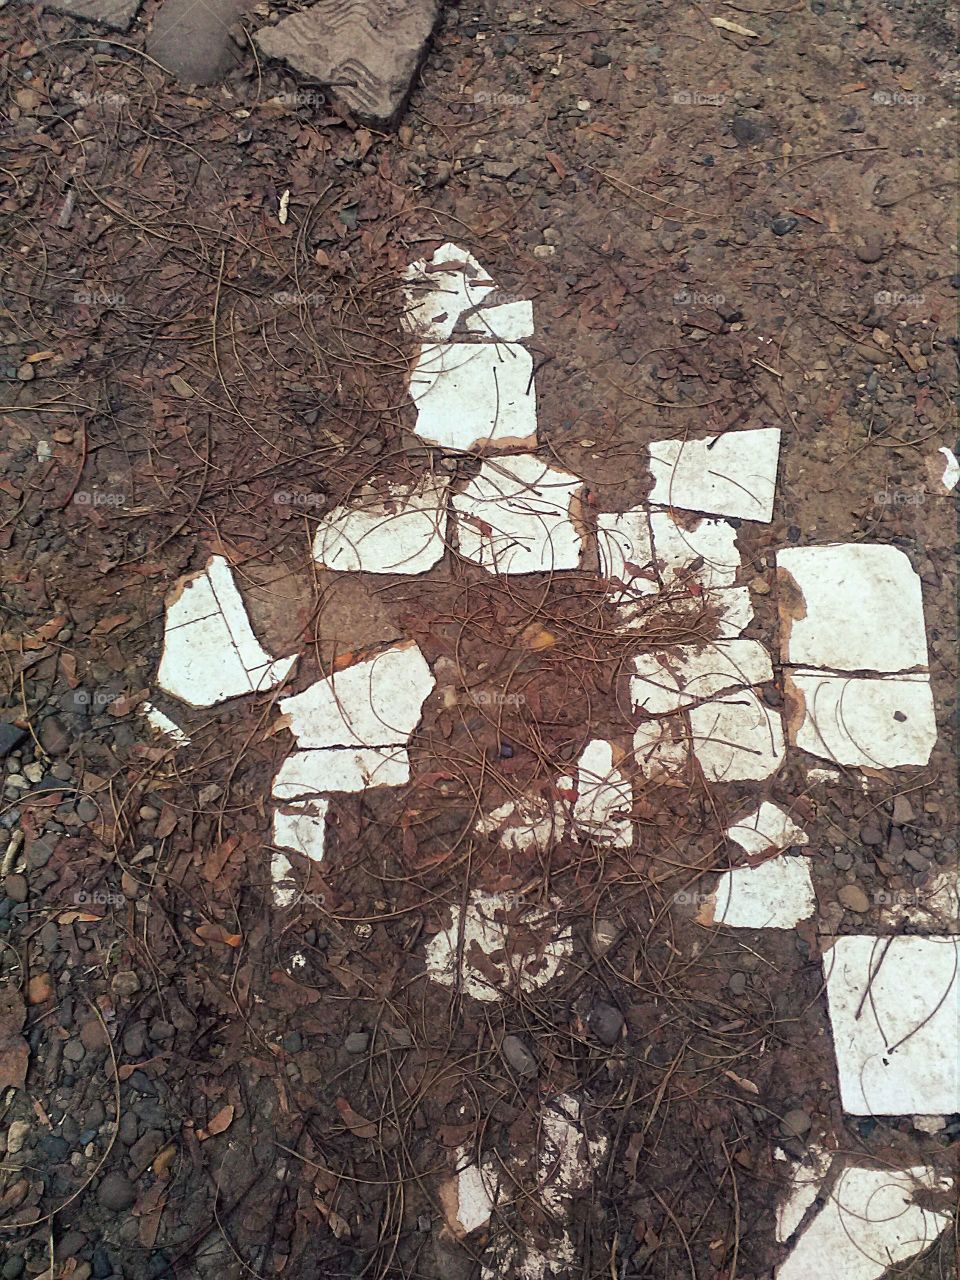 Abstract tiles on the ground